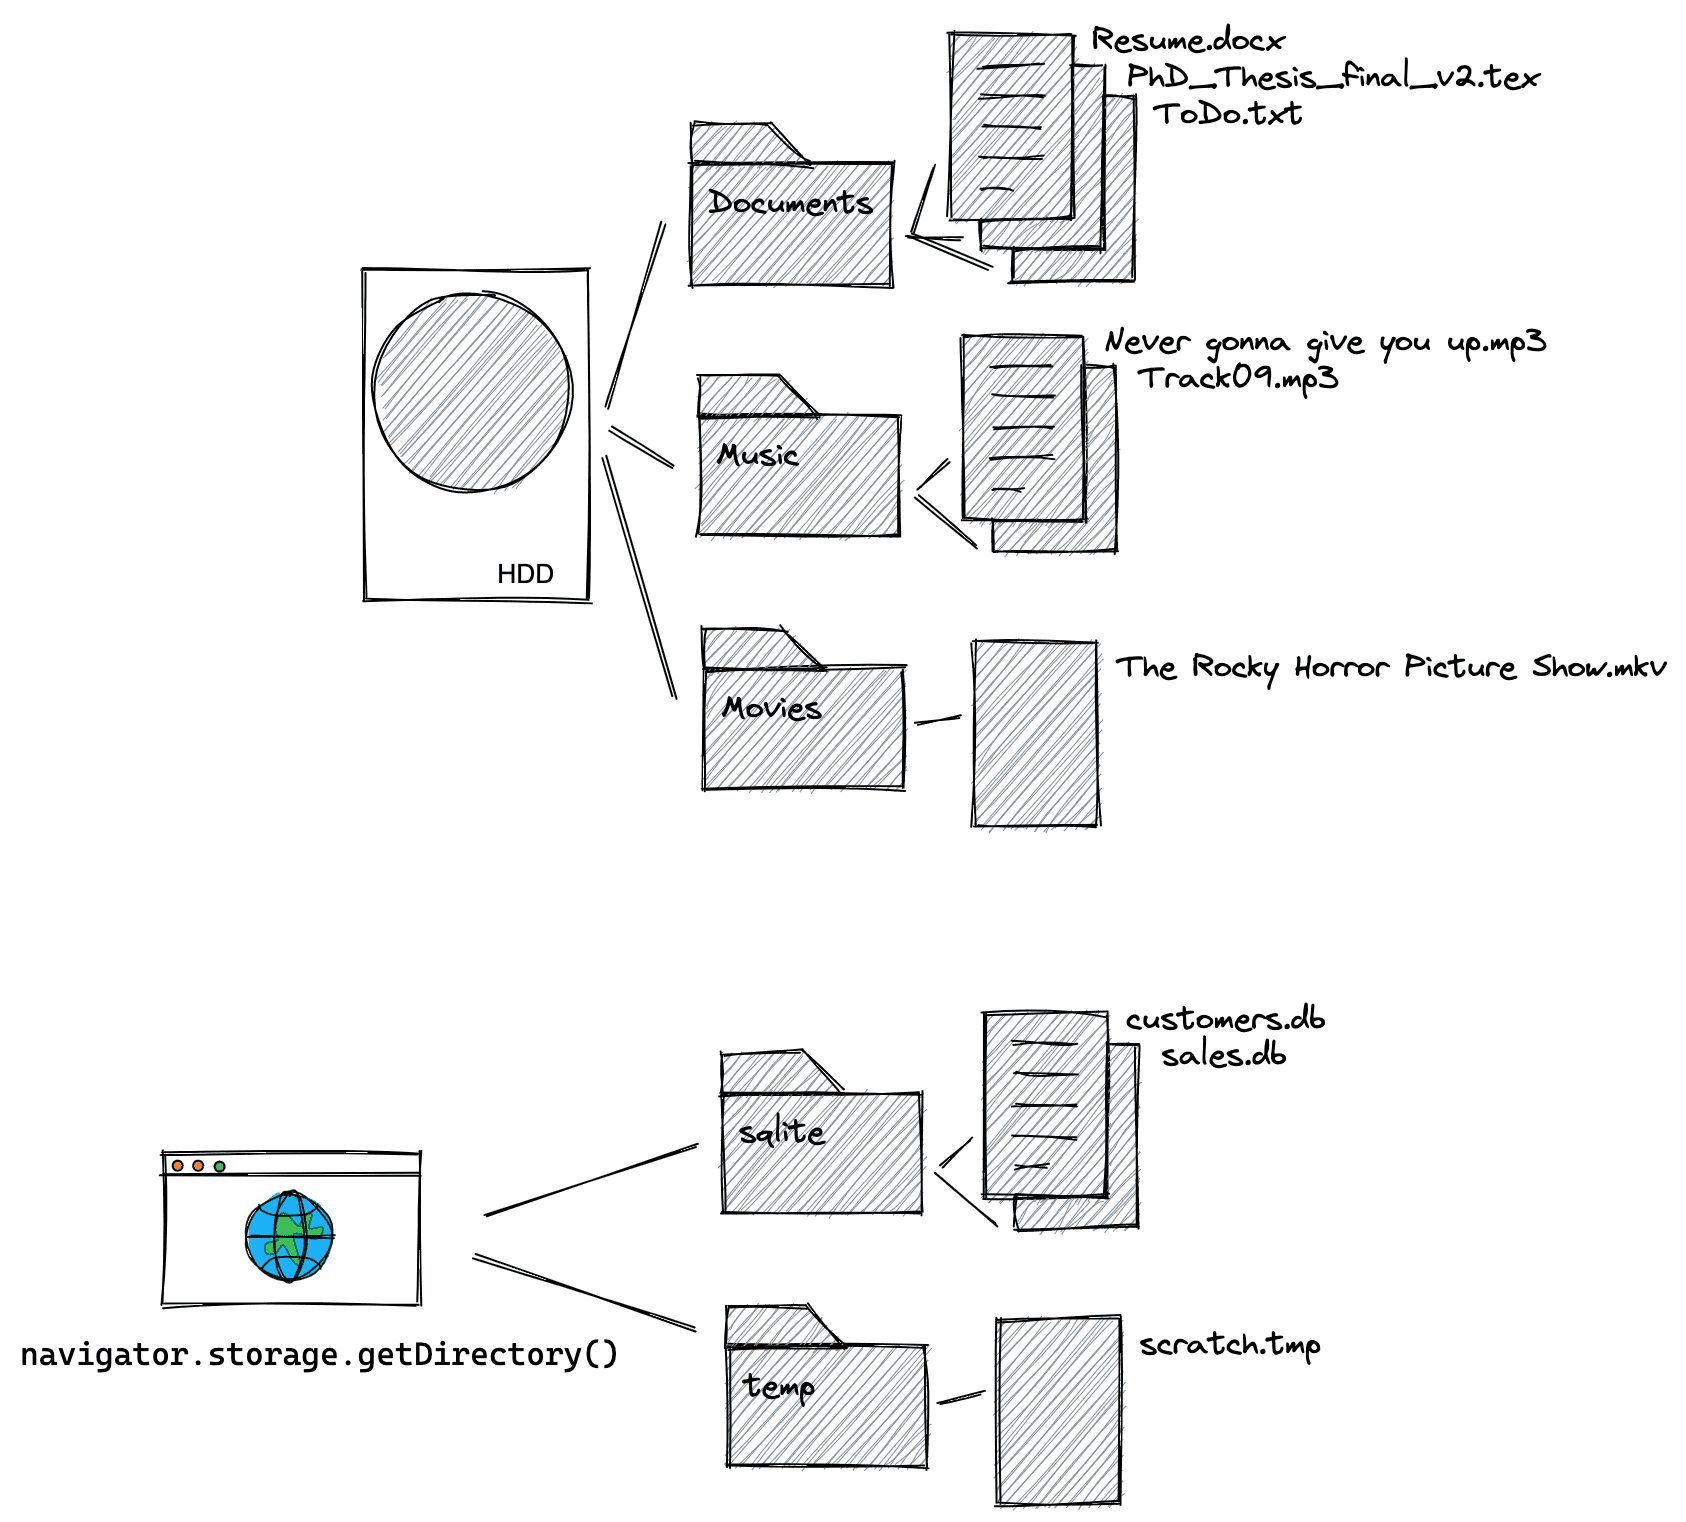 Diagram of the user-visible file system and the origin private file system with two exemplary file hierarchies. The entry point for the user-visible file system is a symbolic harddisk, the entry point for the origin private file system is calling of the method 'navigator.storage.getDirectory'.